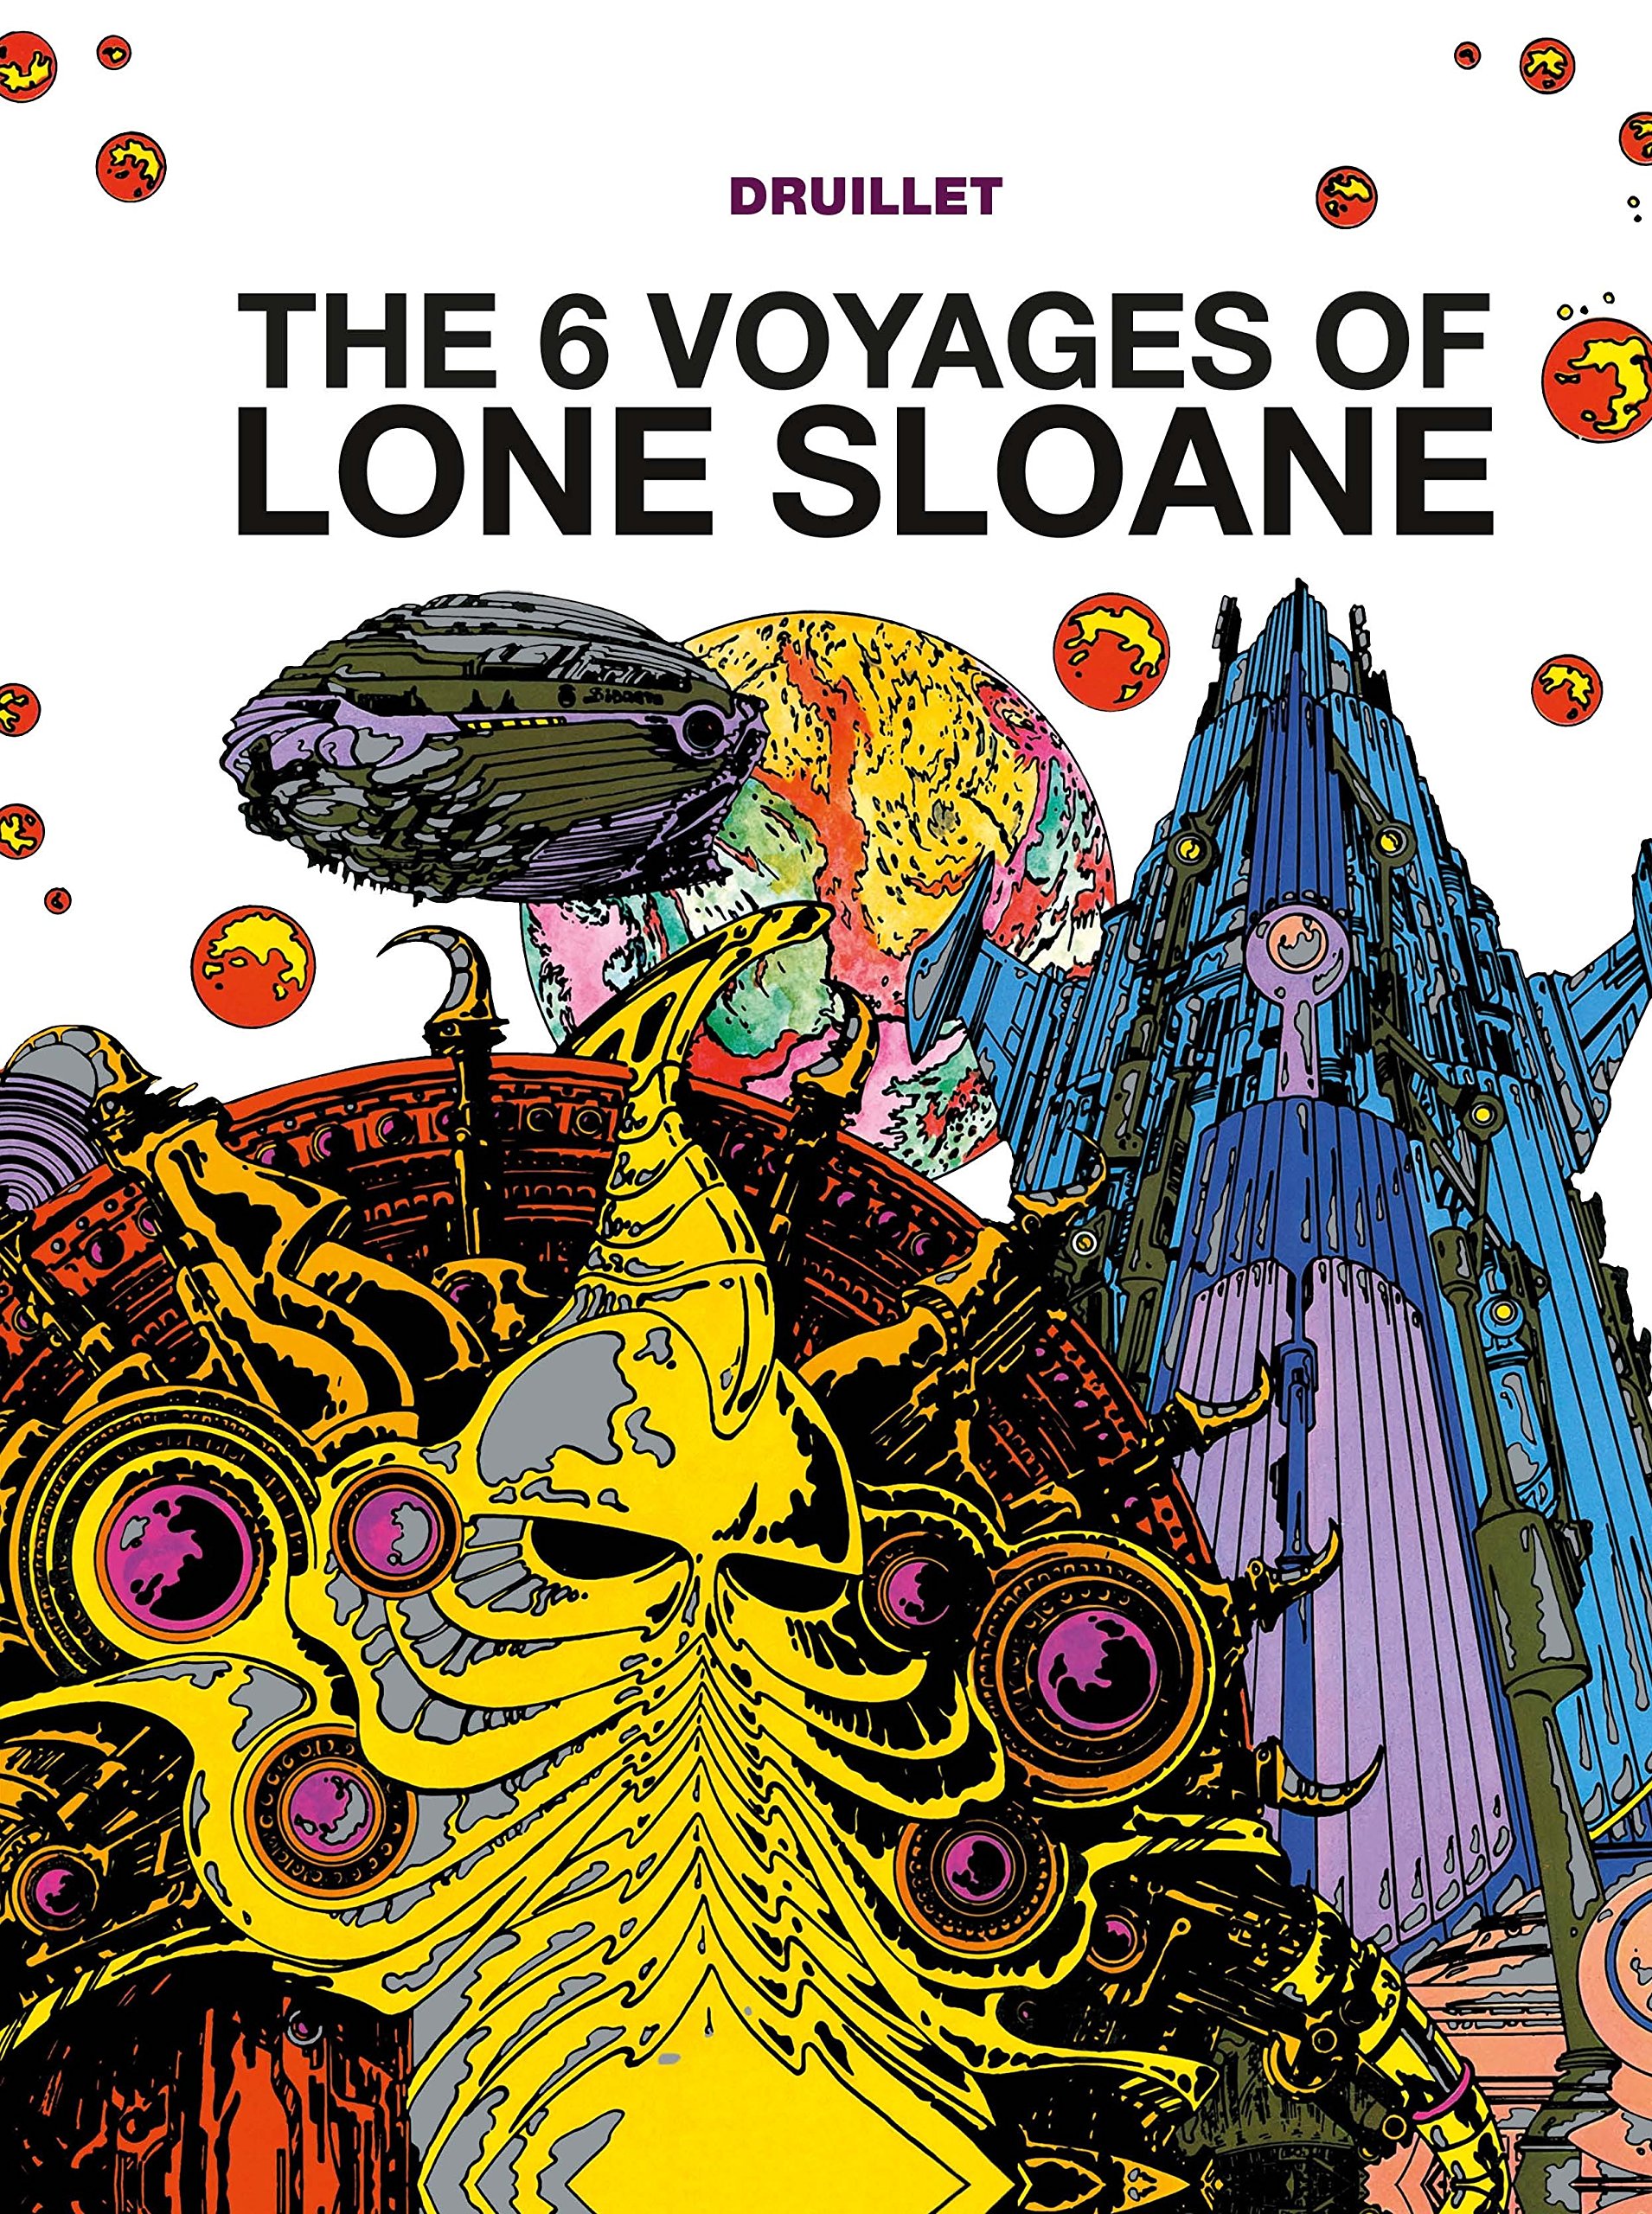 The 6 Voyages of Lone Sloan book cover